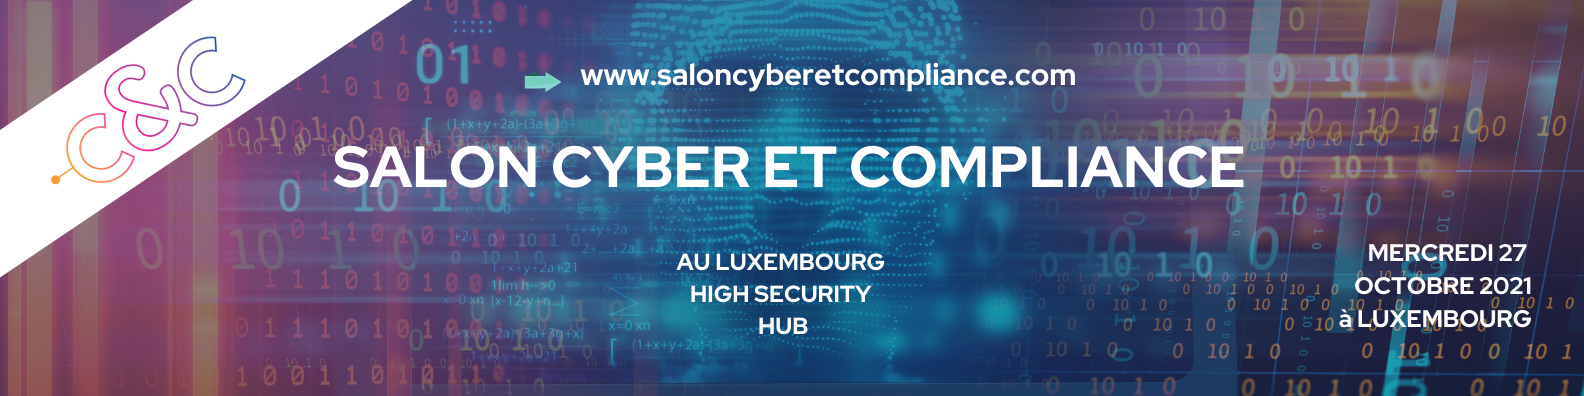 cyber and compliance banner